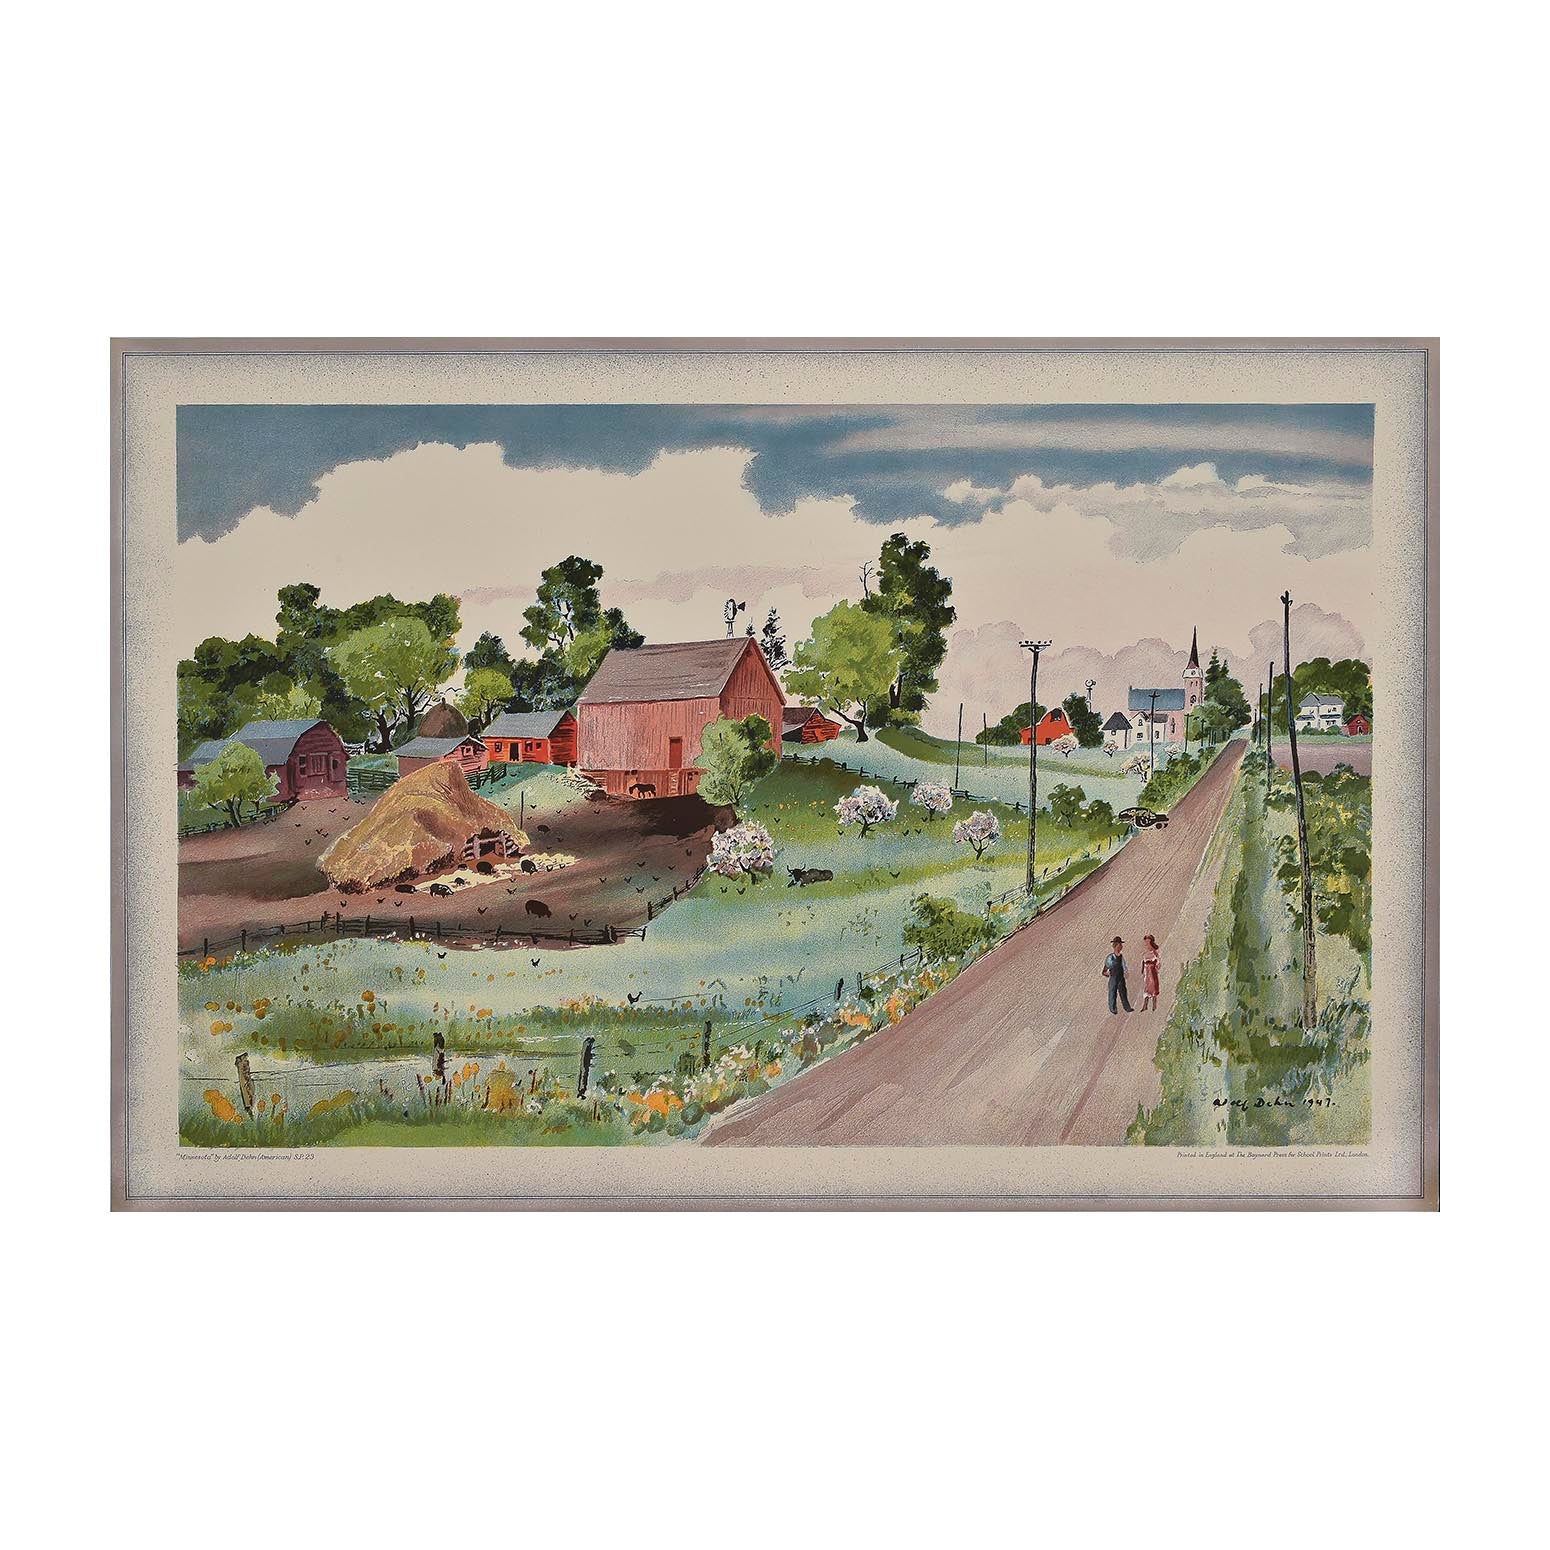 Original ‘School Print’, Minnesota, by Adolf Dehn, and published by School Prints Ltd, 1947. The image depicts a country scene in Minnesota, USA, with a long straight road leading to a church and village houses.